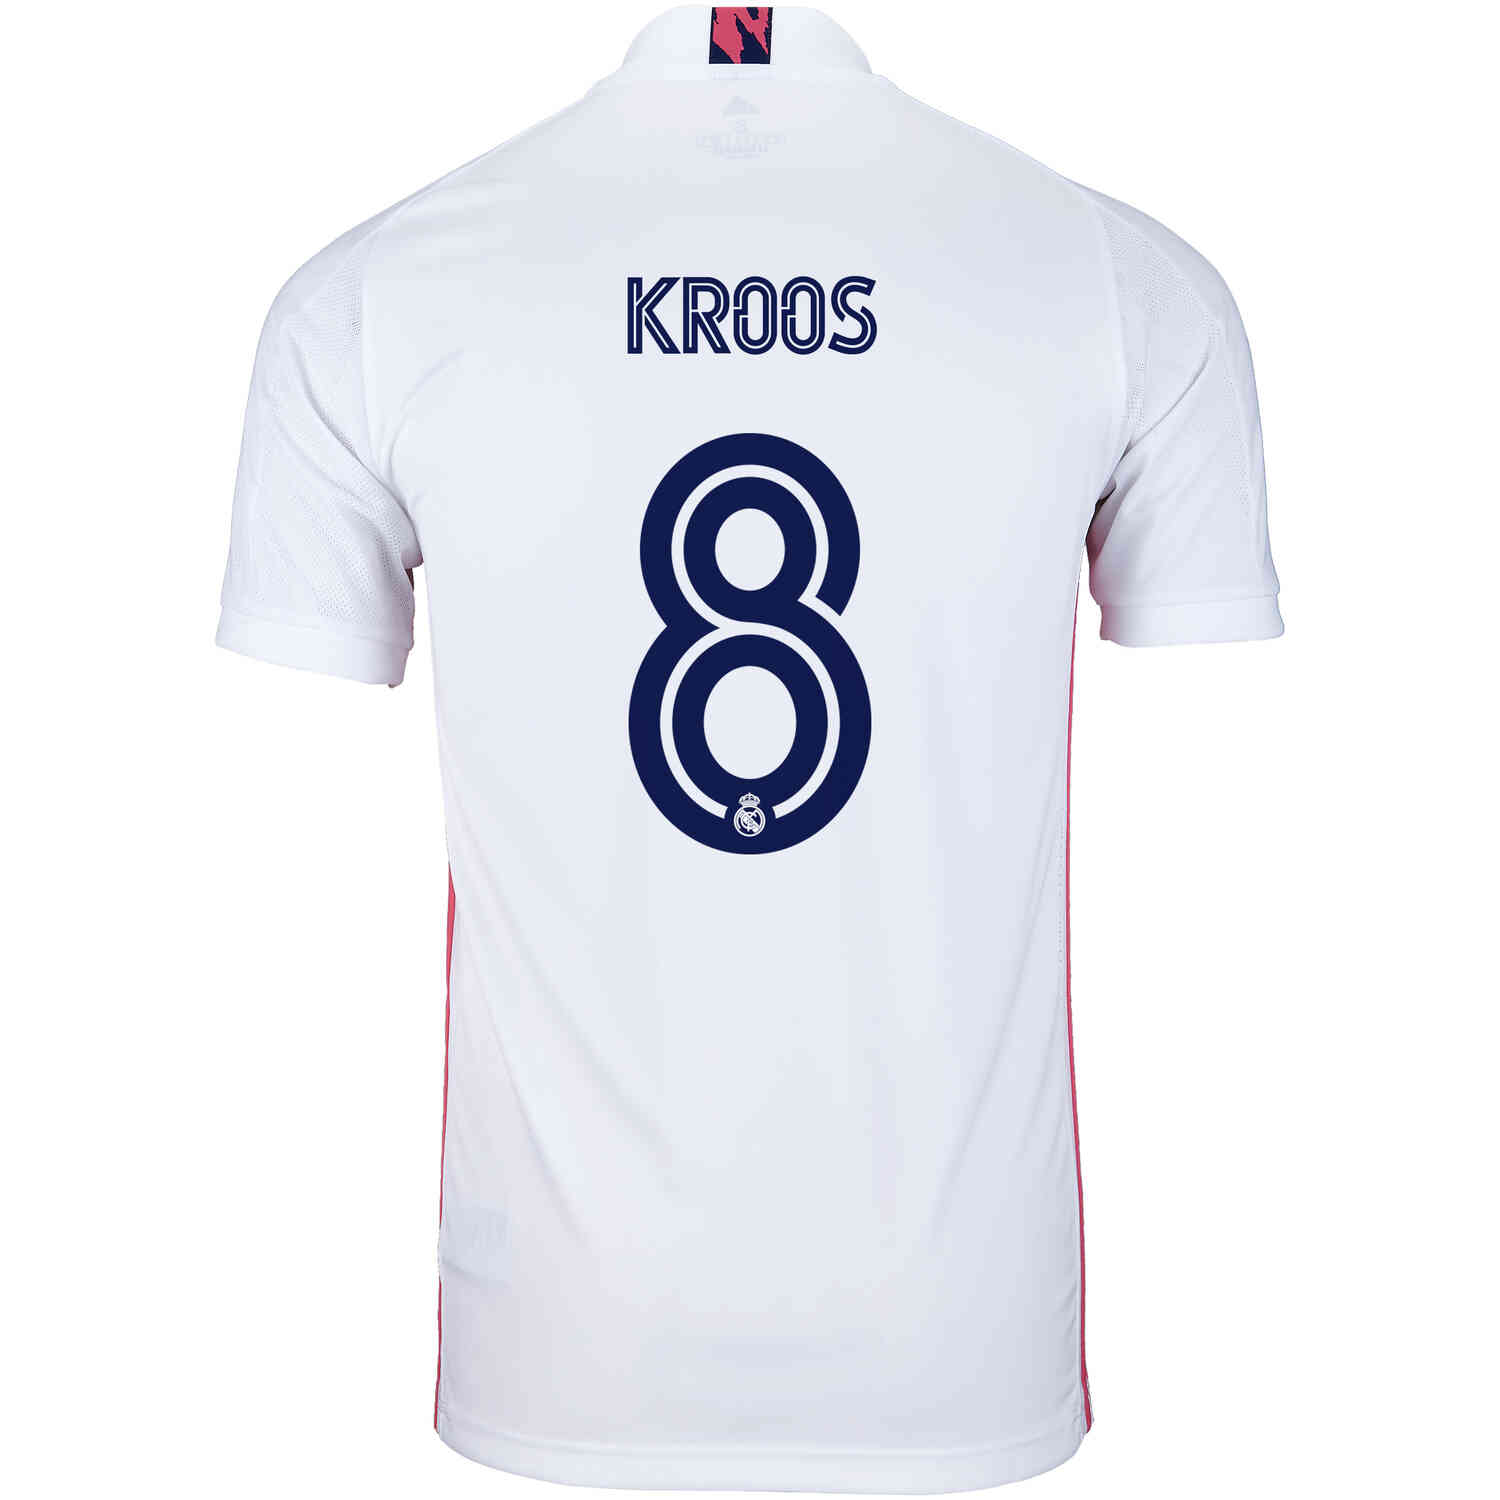 2020/21 Toni Kroos Real Madrid Home Jersey - Soccer Master